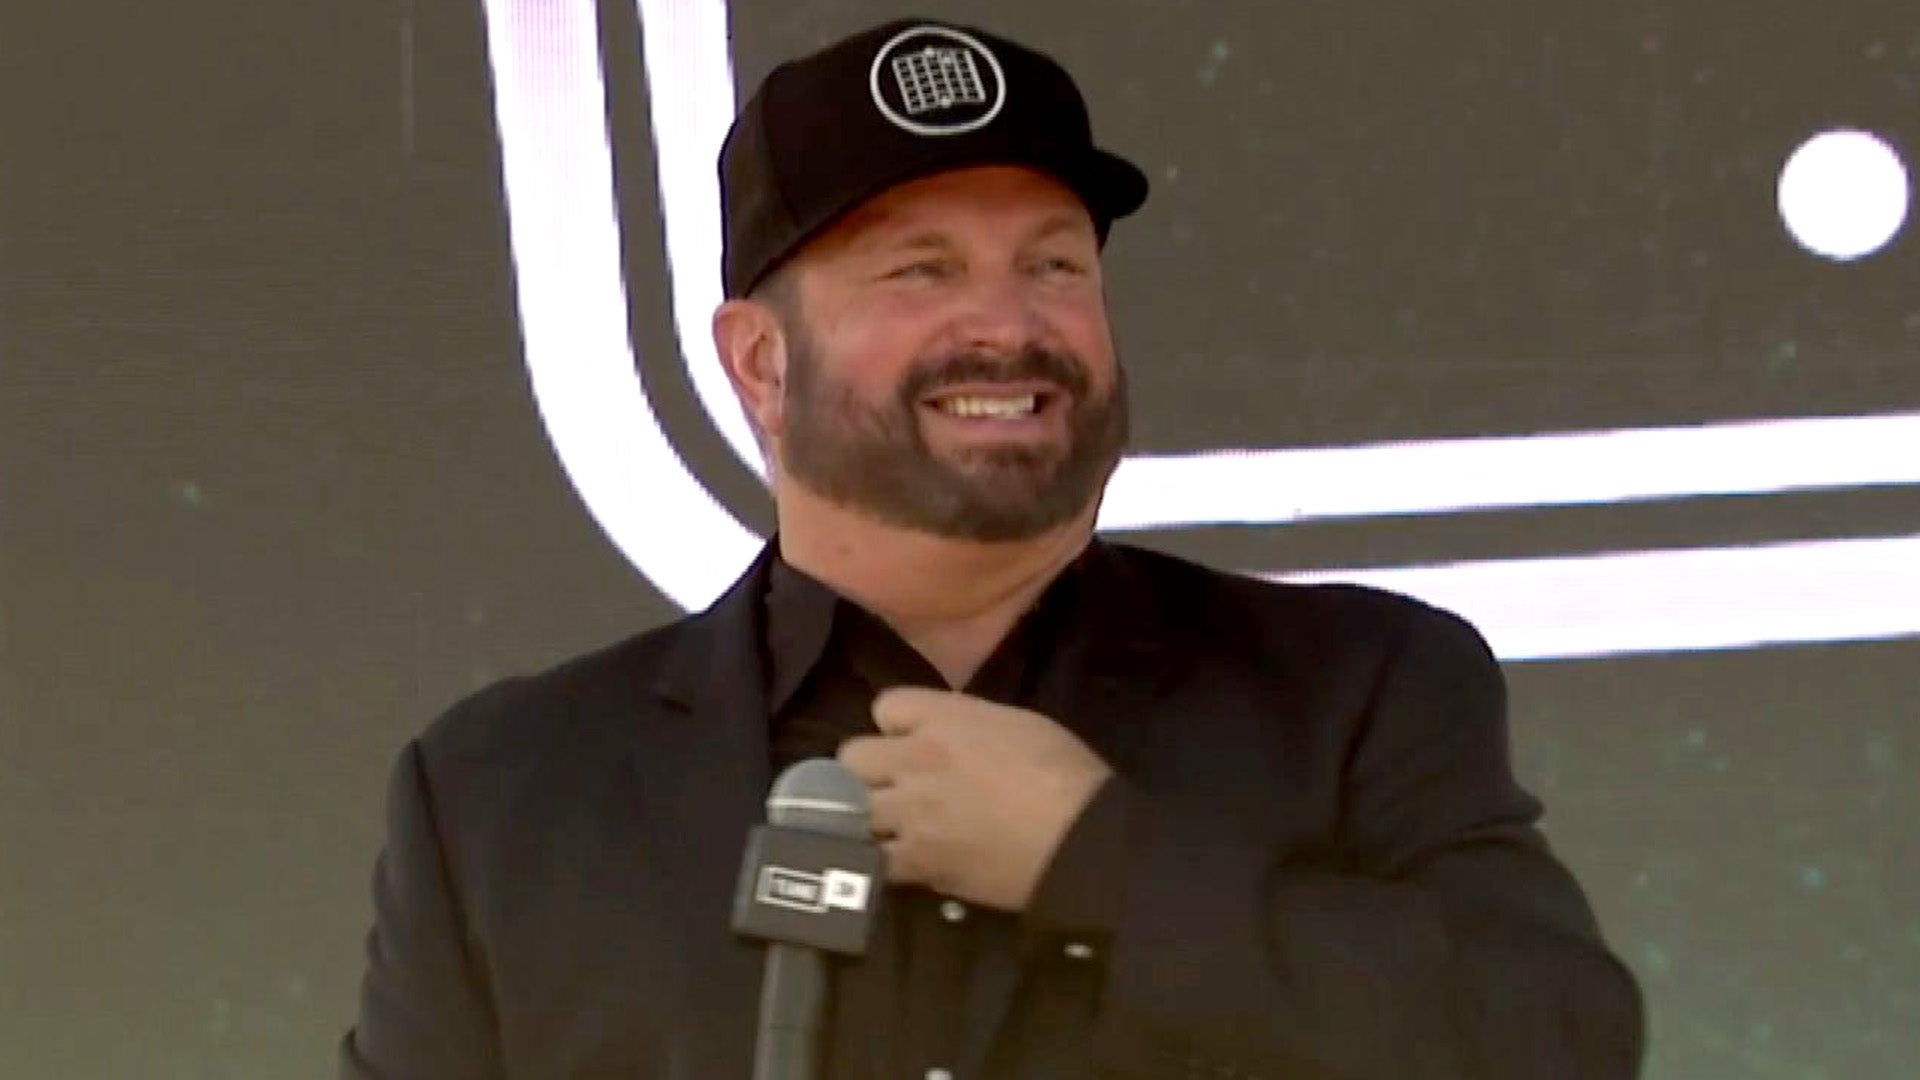 Garth Brooks Announces New Sports Radio Station That’s ‘Not for the Faint of Heart’